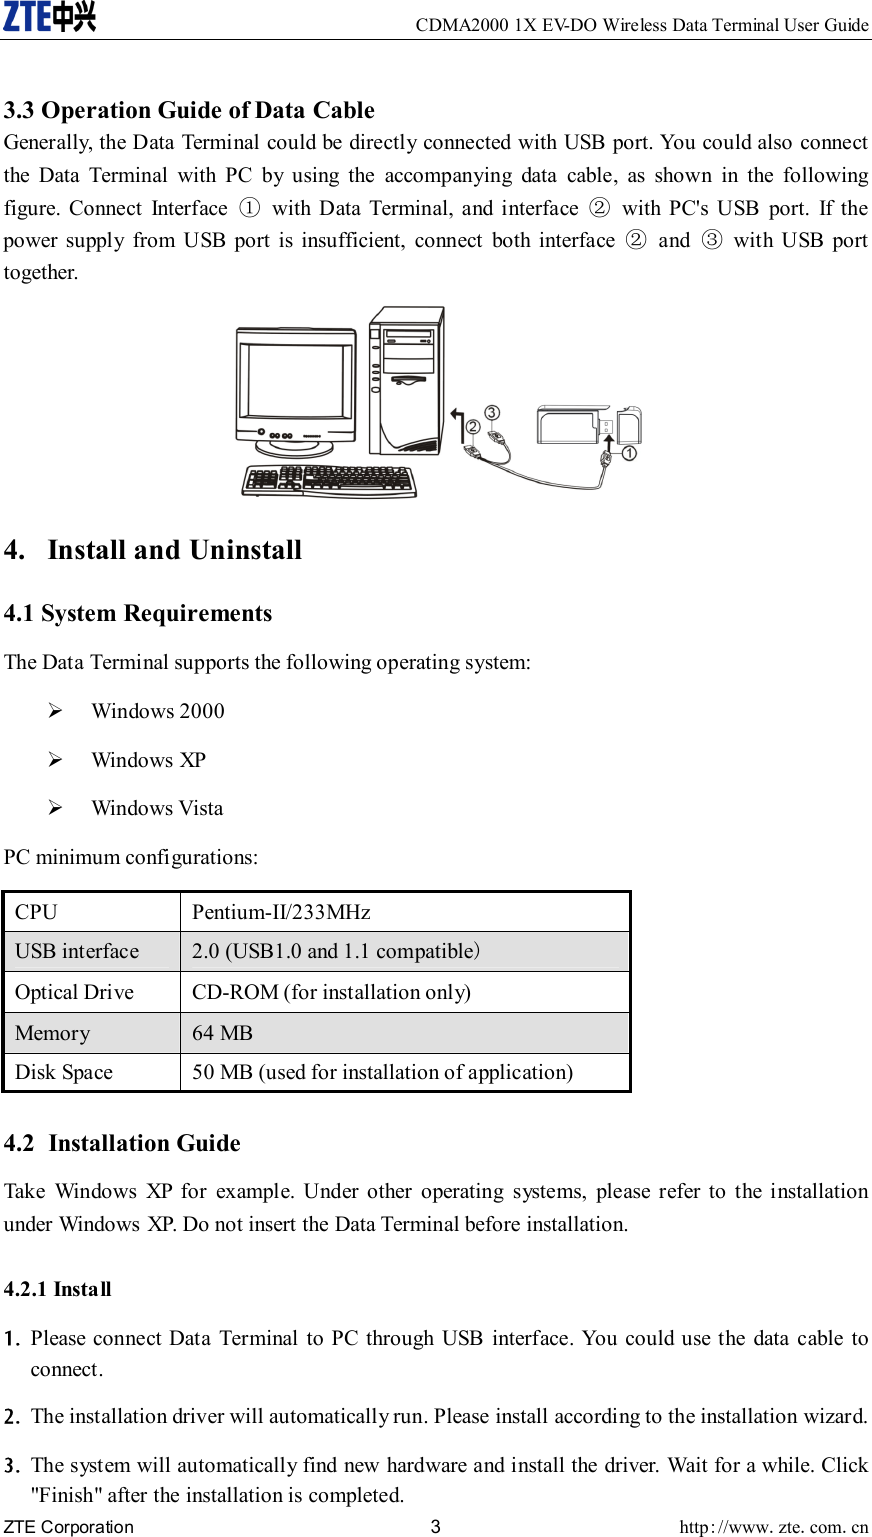     CDMA2000 1X EV-DO Wireless Data Terminal User Guide ZTE Corporation 3 http://www.zte.com.cn   3.3 Operation Guide of Data Cable Generally, the Data Terminal could be directly connected with USB port. You could also connect the Data Terminal with PC by using the accompanying data cable, as shown in the following figure. Connect Interface ①  with Data Terminal, and interface ②  with PC&apos;s USB port. If the power supply from USB port is insufficient, connect both interface ② and ③ with USB port together.  4. Install and Uninstall 4.1 System Requirements The Data Terminal supports the following operating system: ¾ Windows 2000 ¾ Windows XP ¾ Windows Vista PC minimum configurations: CPU Pentium-II/233MHz USB interface    2.0 (USB1.0 and 1.1 compatible) Optical Drive    CD-ROM (for installation only)   Memory   64 MB   Disk Space    50 MB (used for installation of application)  4.2 Installation Guide Take Windows XP for example. Under other operating systems, please refer to the installation under Windows XP. Do not insert the Data Terminal before installation. 4.2.1 Install 1. Please connect Data Terminal to PC through USB interface. You could use the data cable to connect. 2. The installation driver will automatically run. Please install according to the installation wizard. 3. The system will automatically find new hardware and install the driver. Wait for a while. Click &quot;Finish&quot; after the installation is completed. 